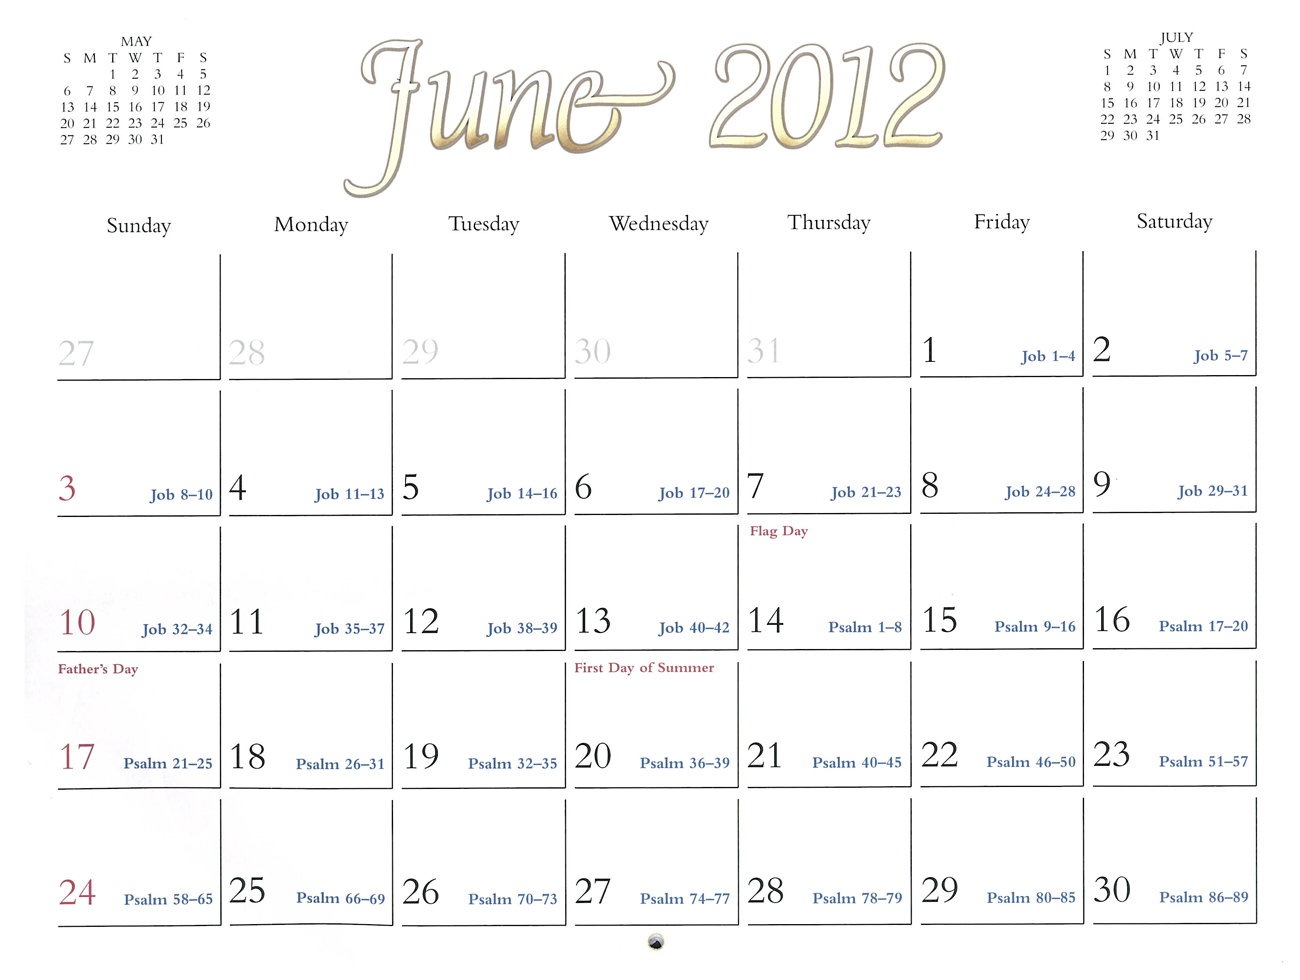 2012 Prophecy Calendar: June - Paul's Letter to the Church at Philippi